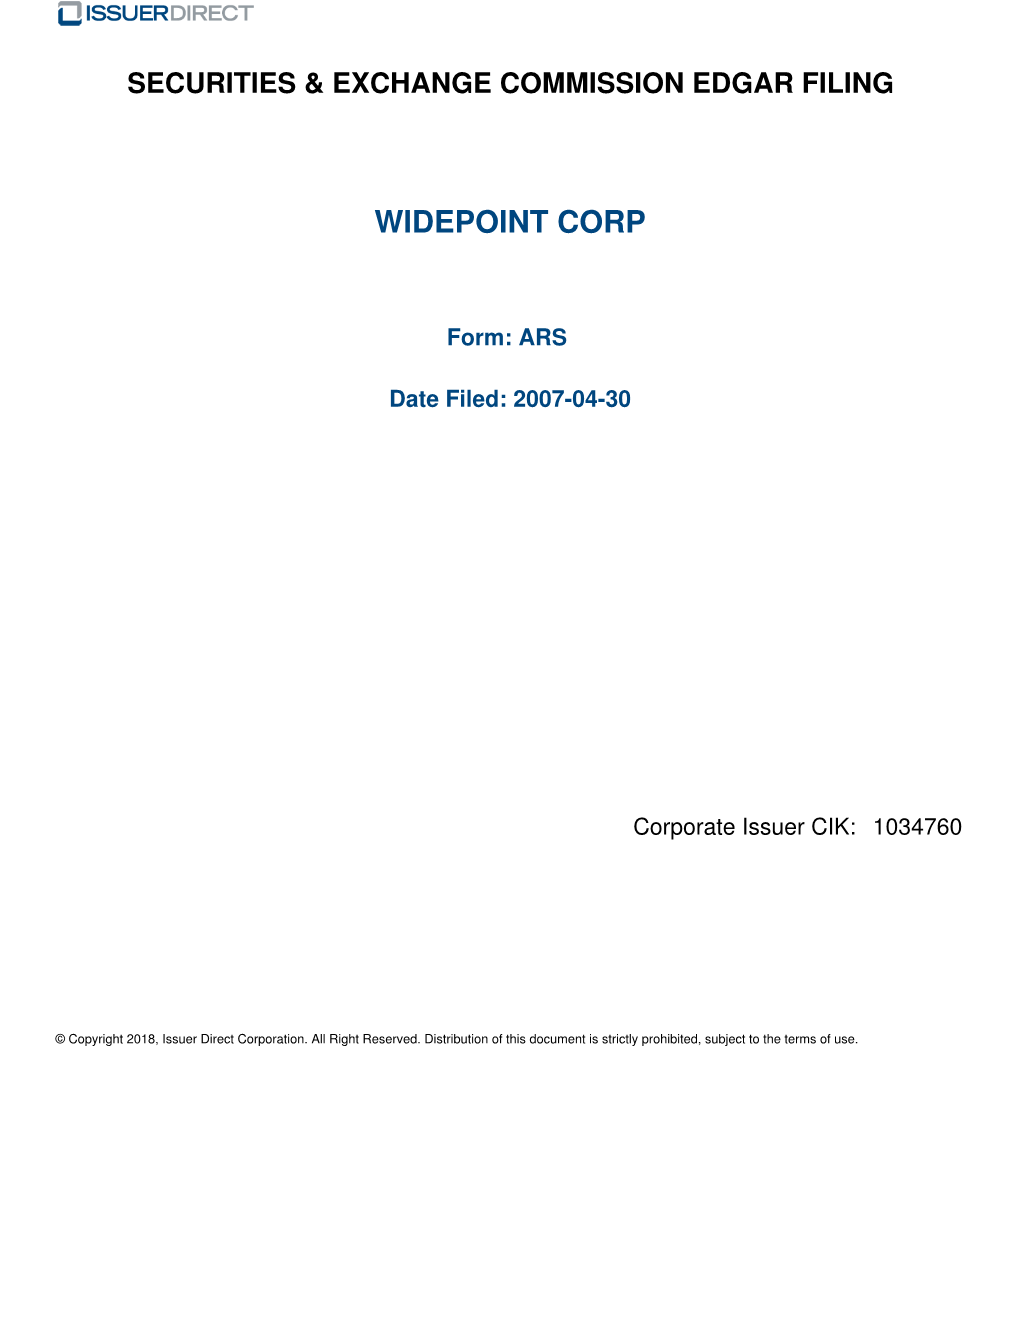 Widepoint Corp